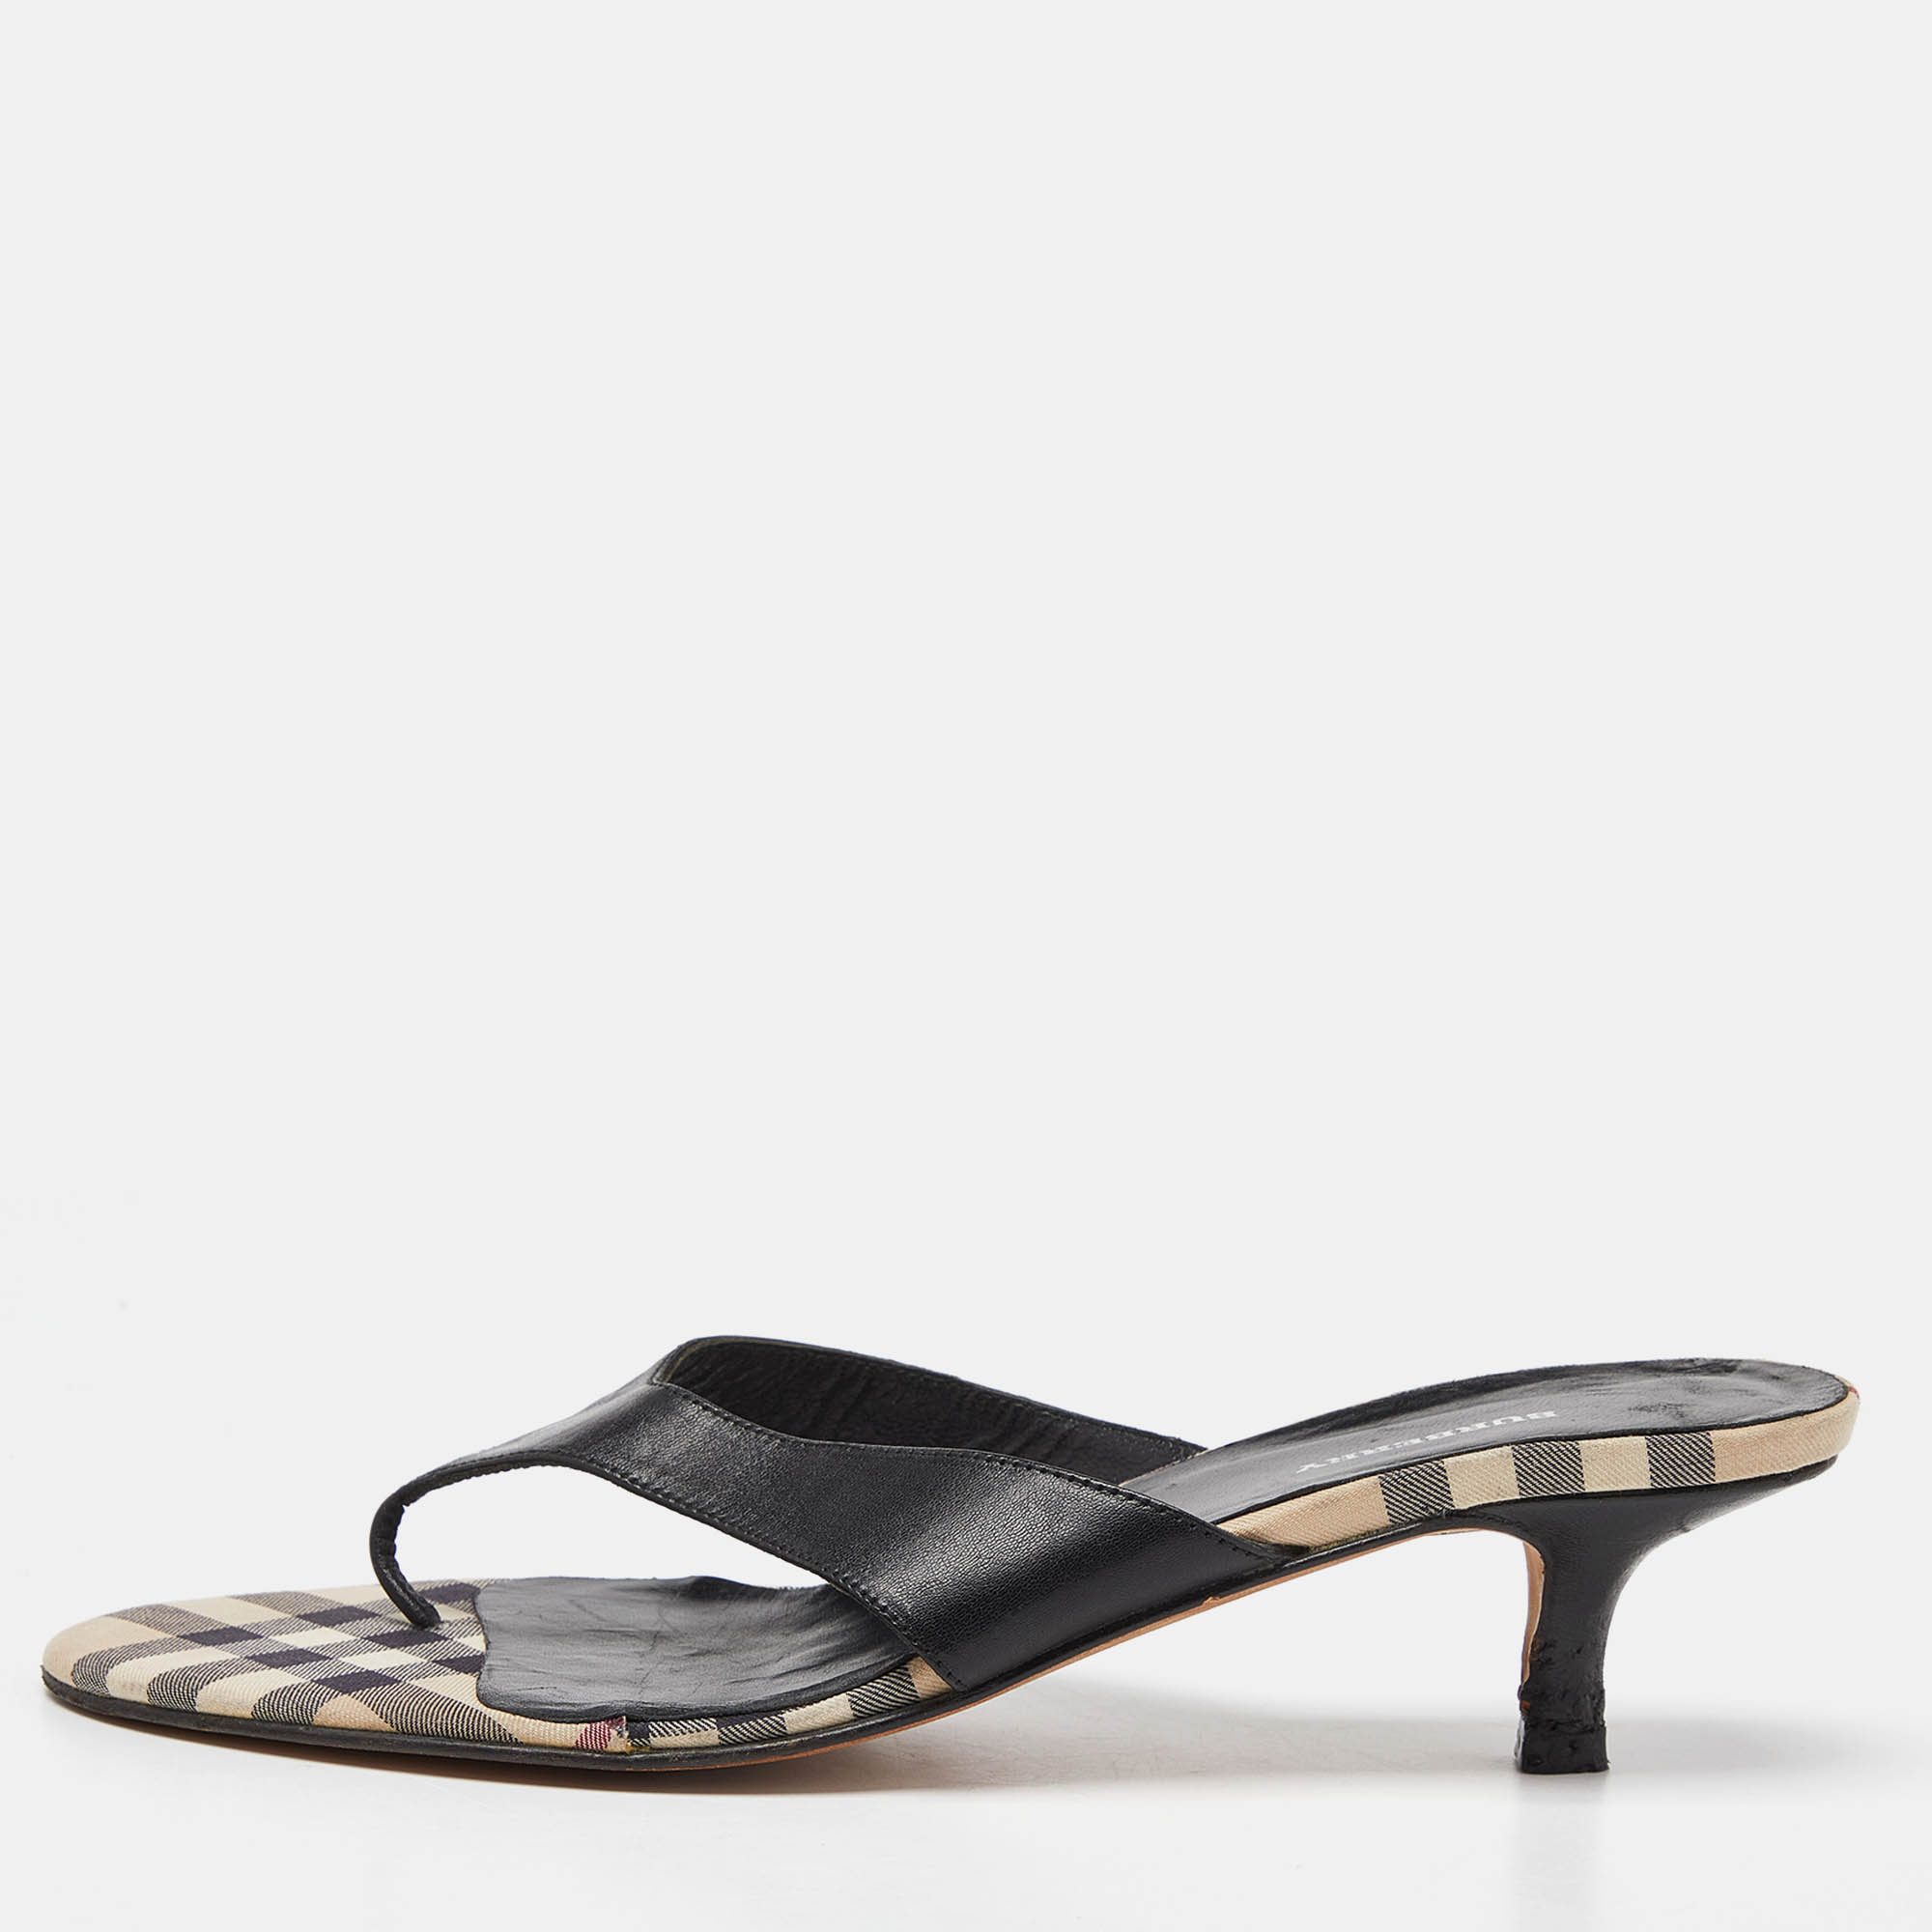 Burberry black leather thong sandals size 37